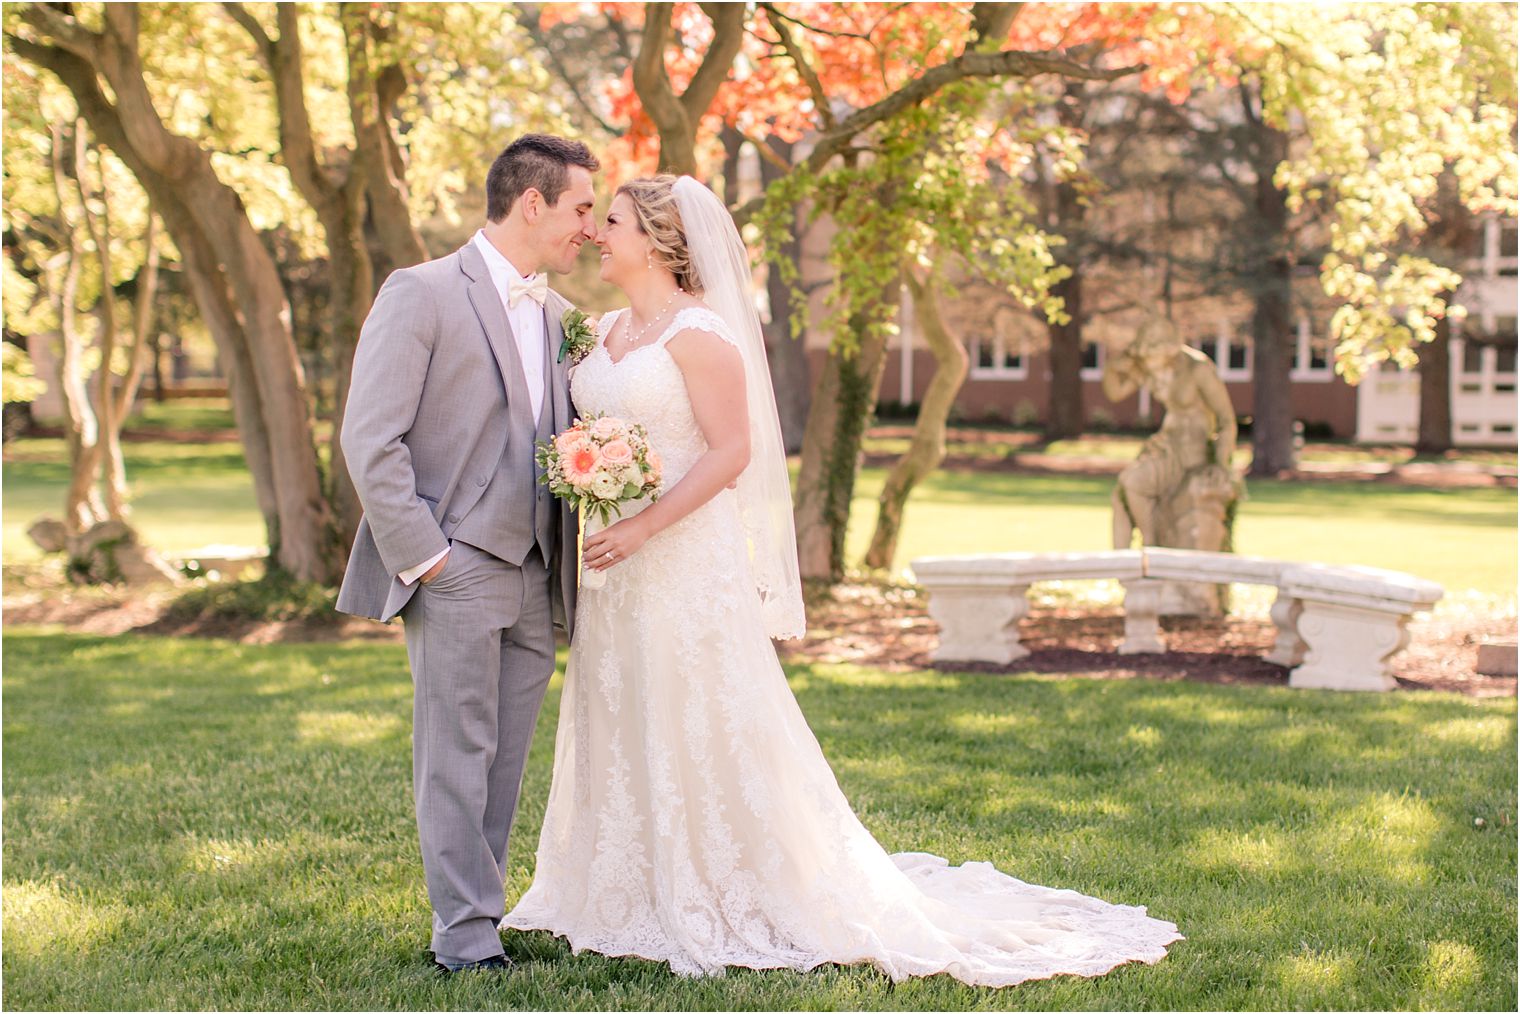 Bride and groom portrait at Monmouth University